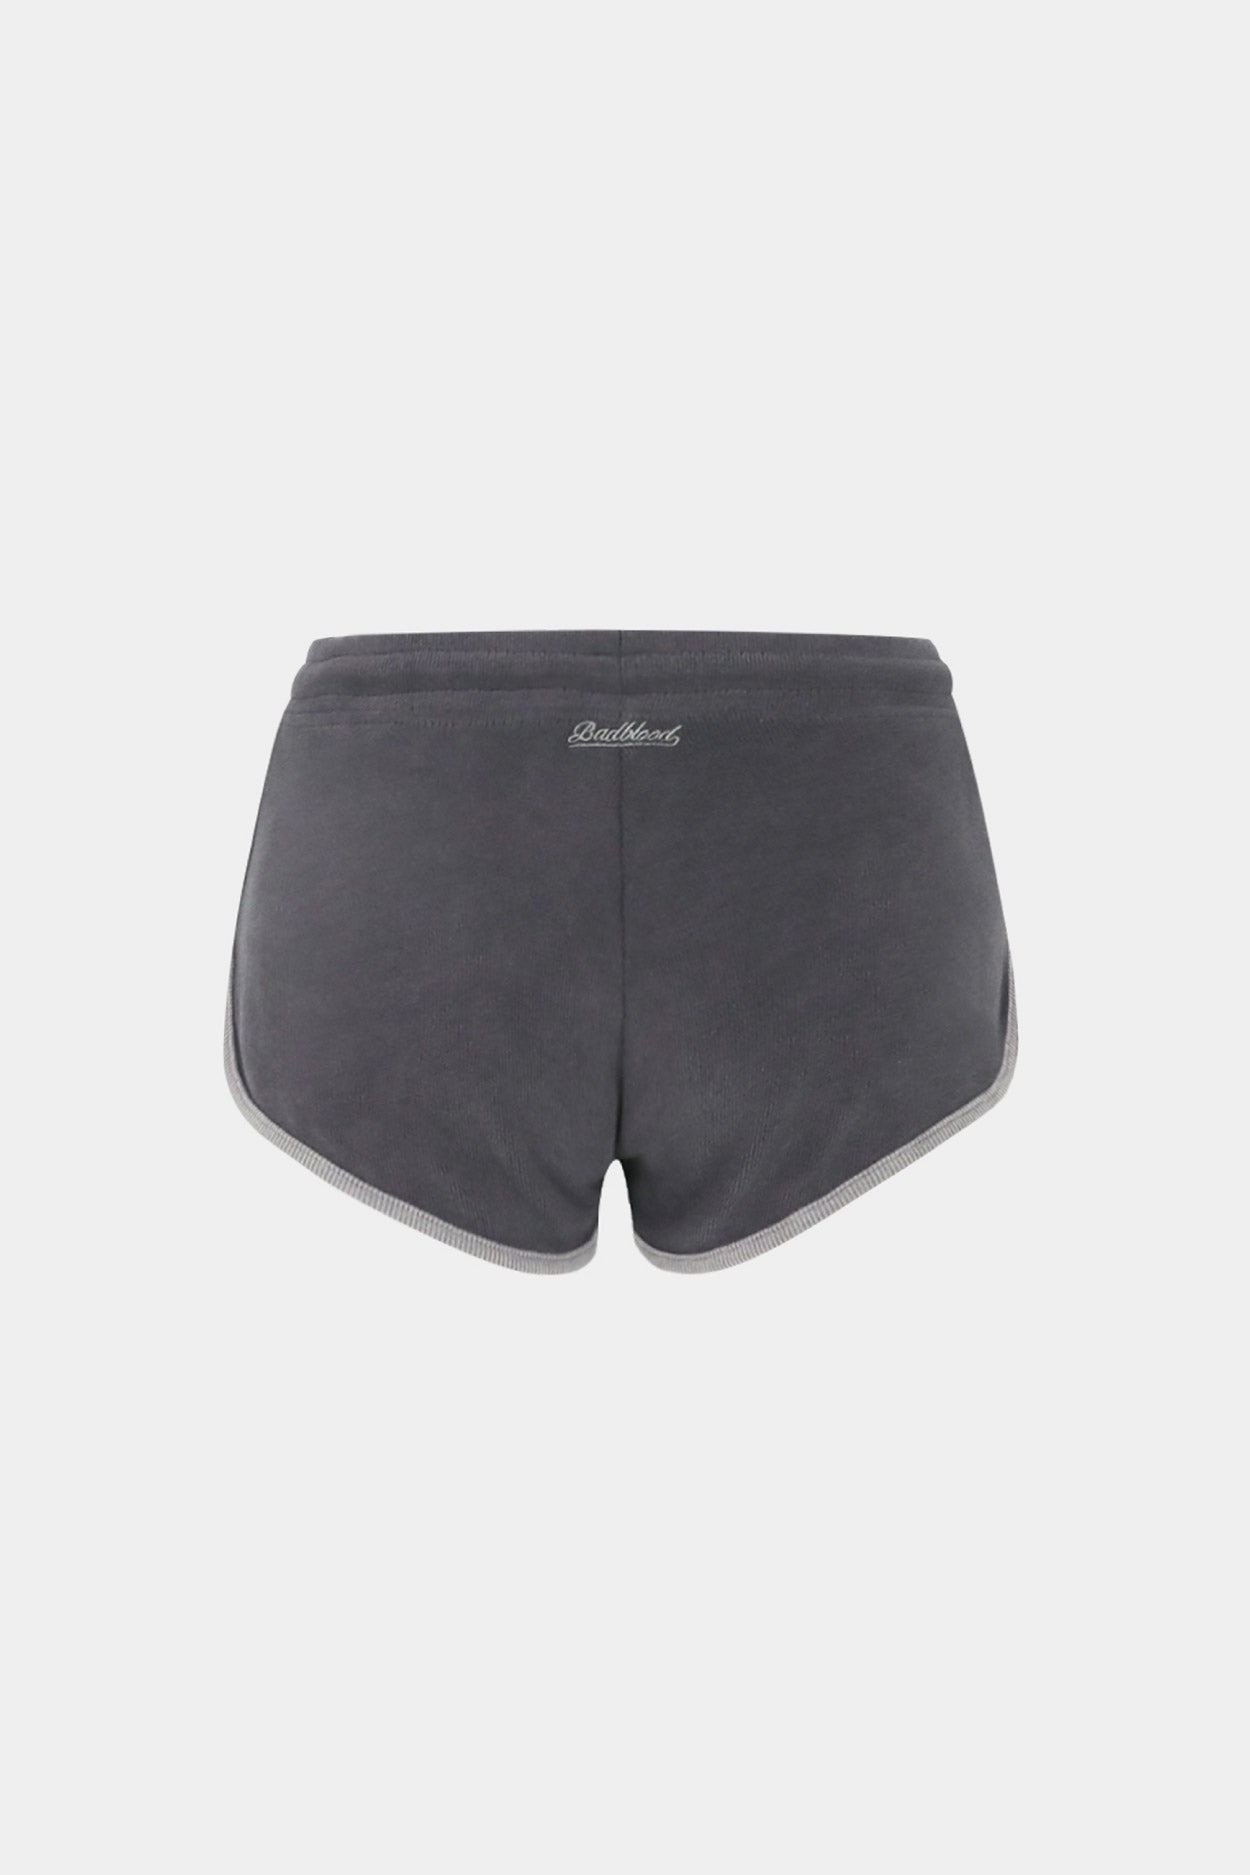 Badblood Beyond Soft Dolphin Shorts Charcoal